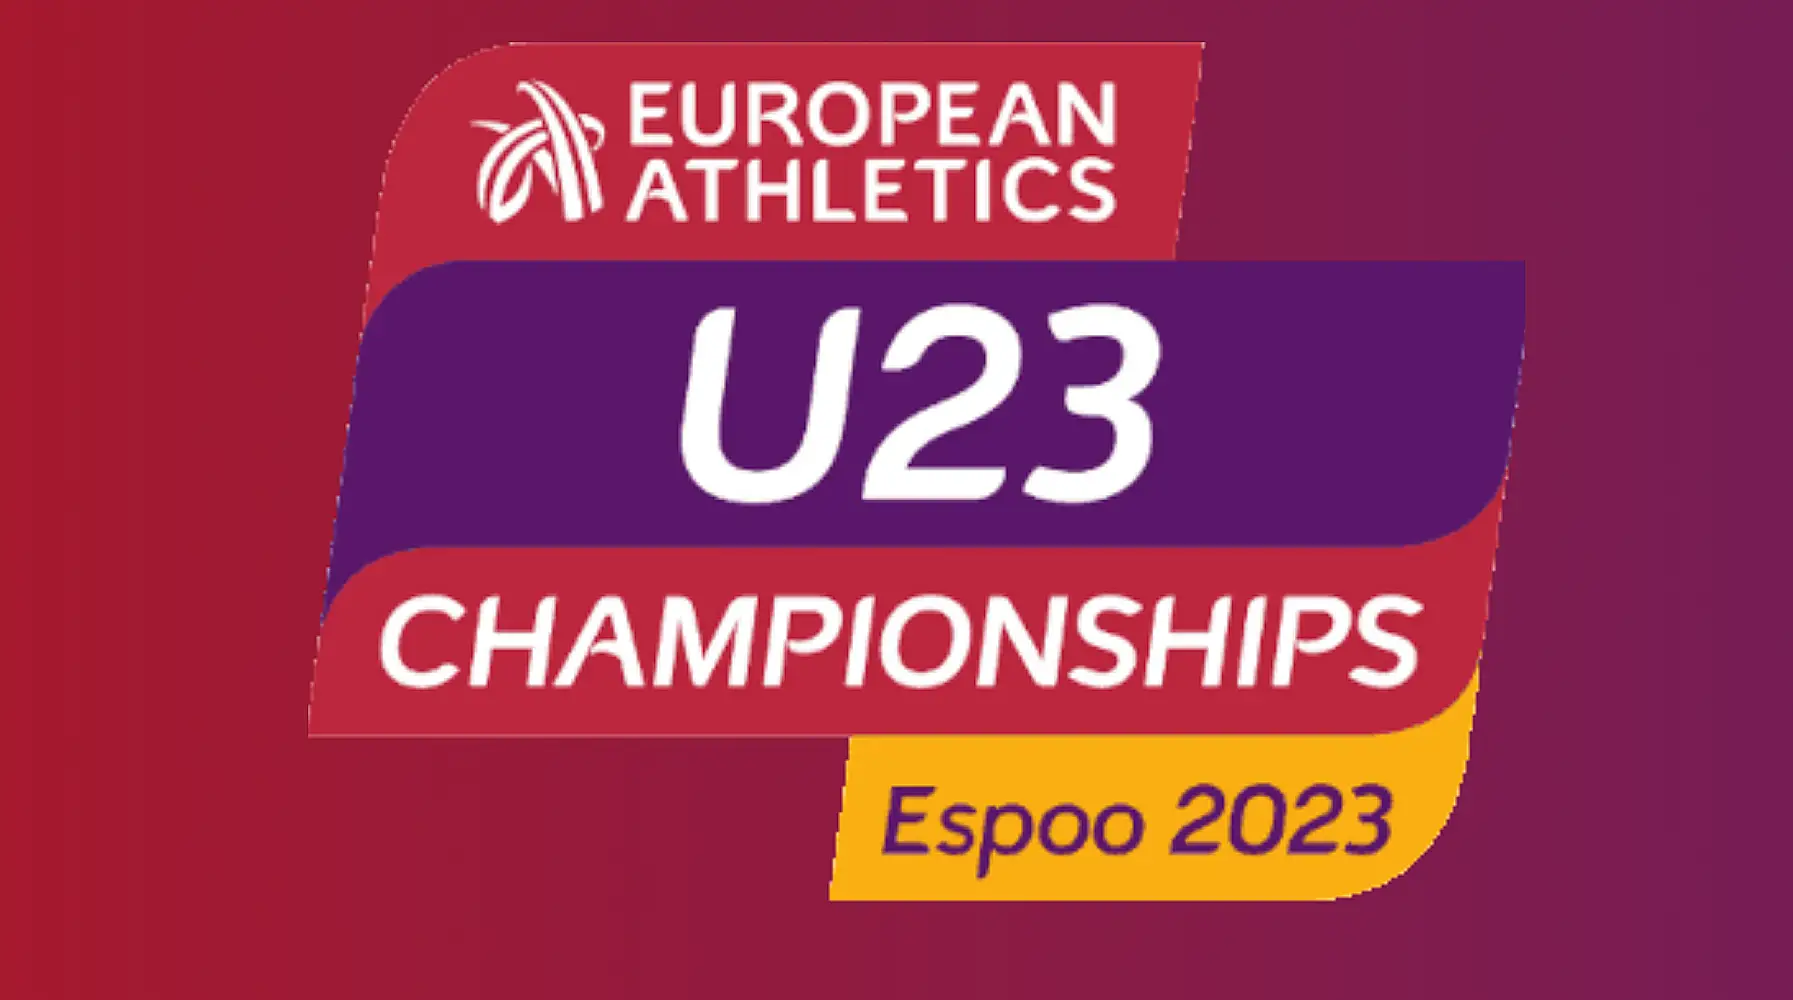 To watch the live stream of the European Athletics U23 Championships 2023, please follow the instructions below: